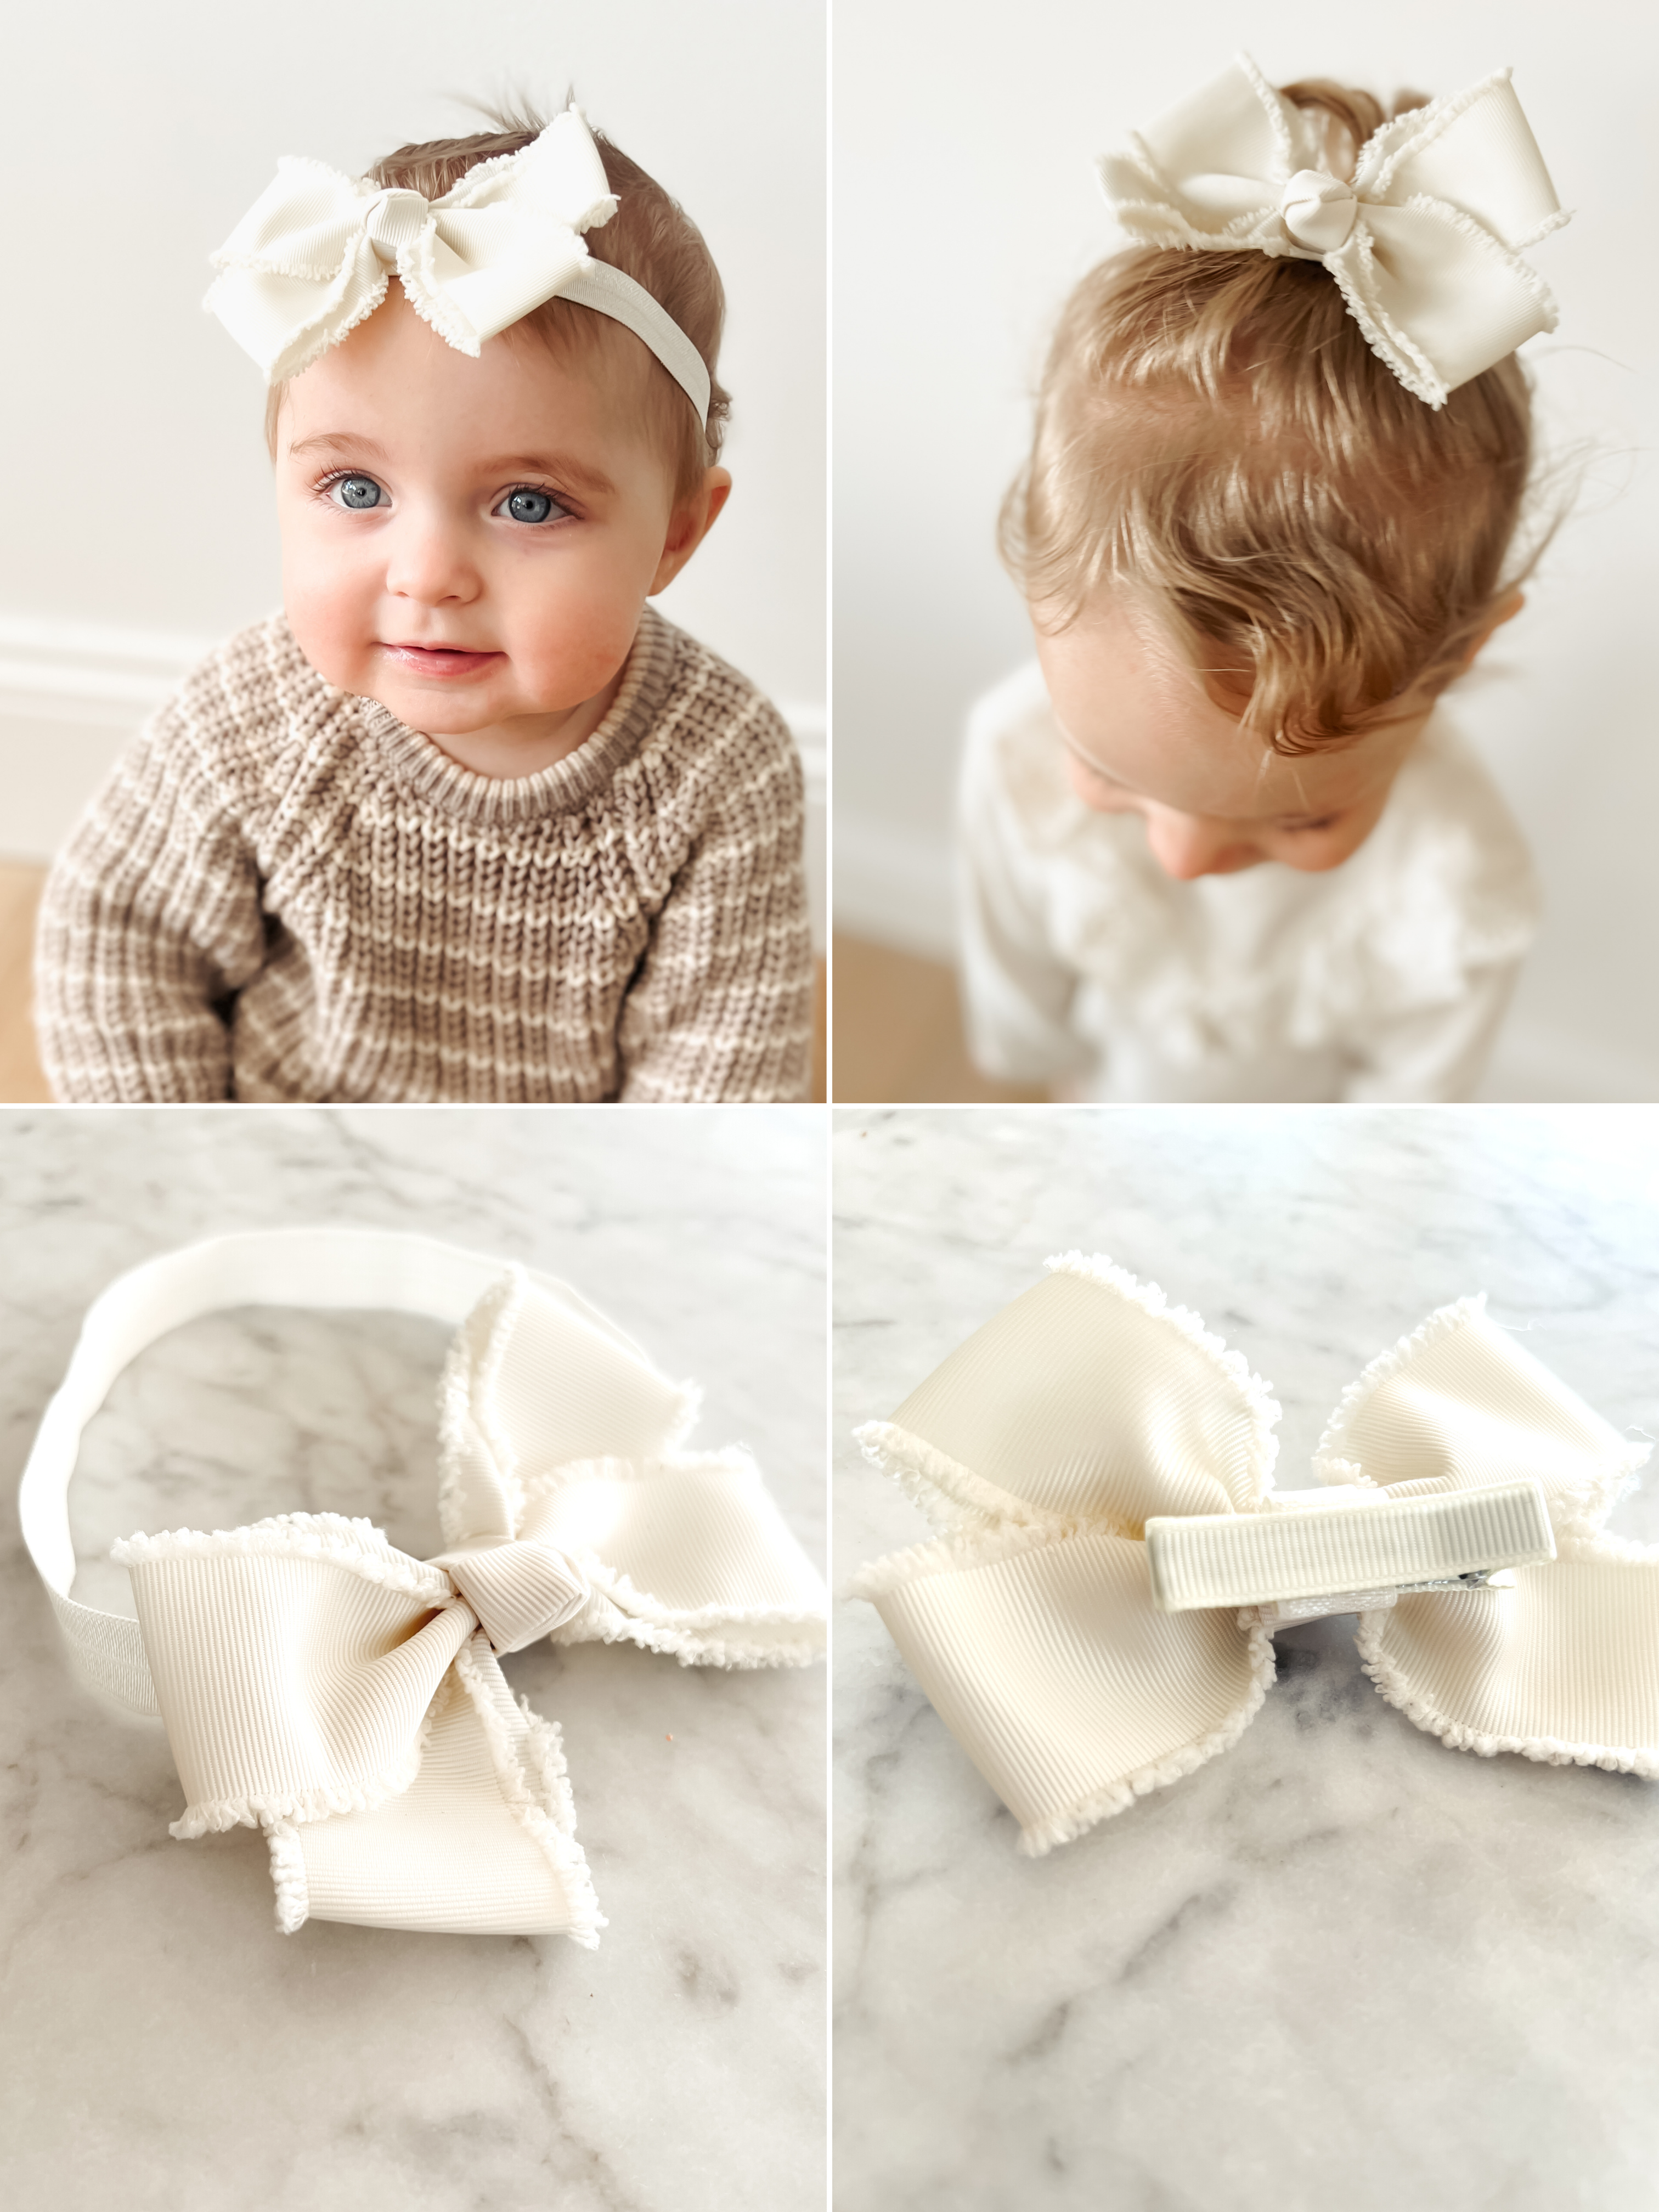 How to Convert Baby Headbands to Bow Clips